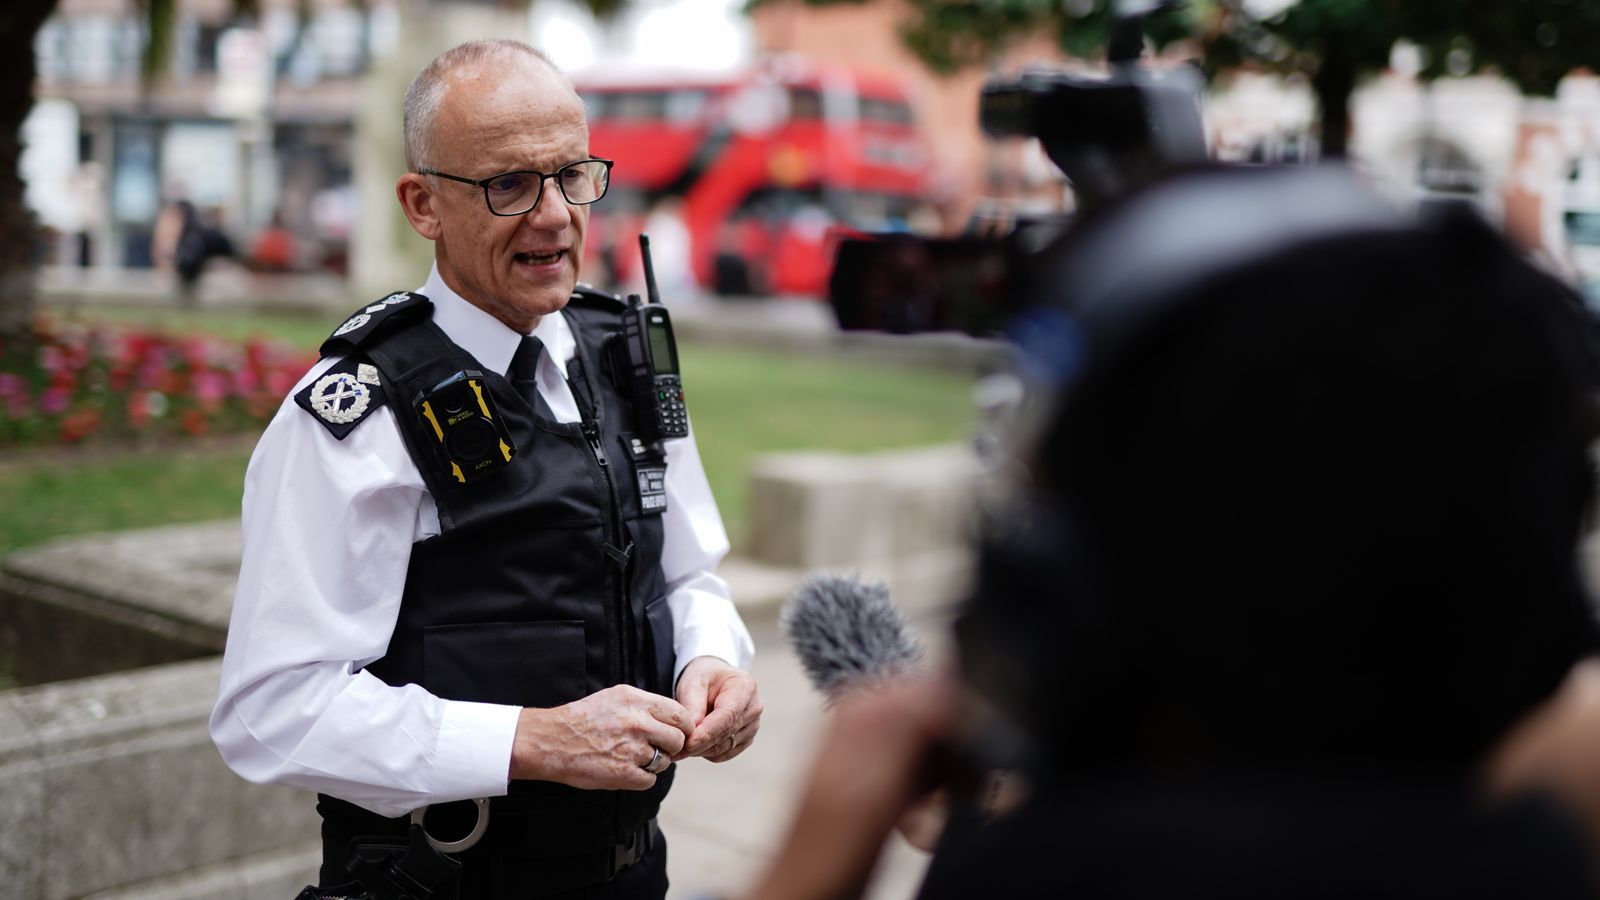 Met Police chief appears at odds with No 10 after 'jihad' protest chants